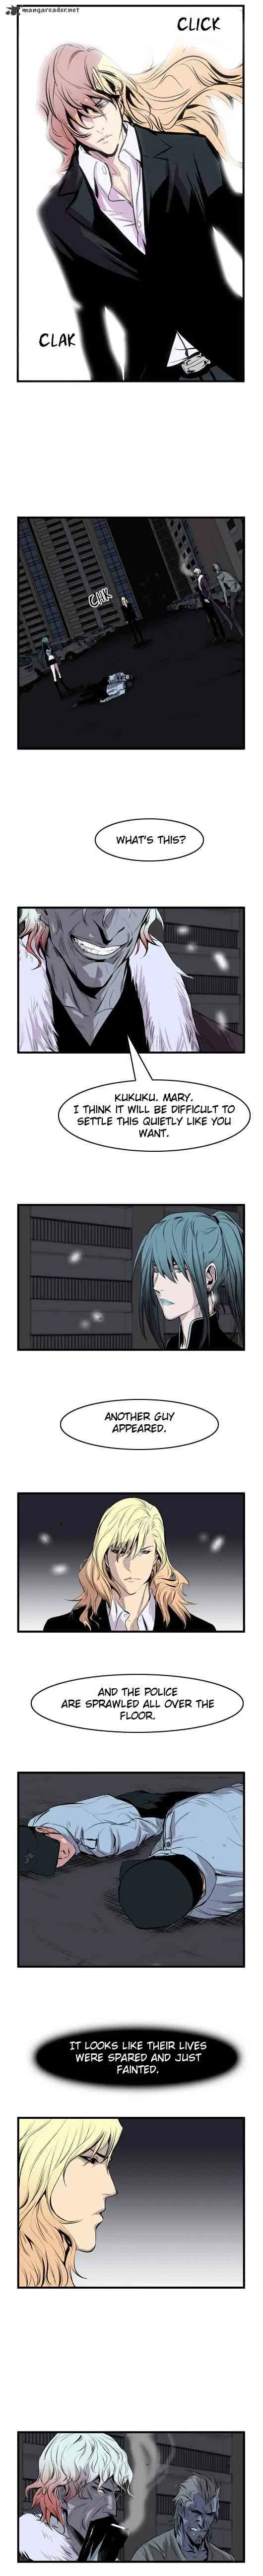 Noblesse Chapter 31 _ Chapters 31-45 page 81